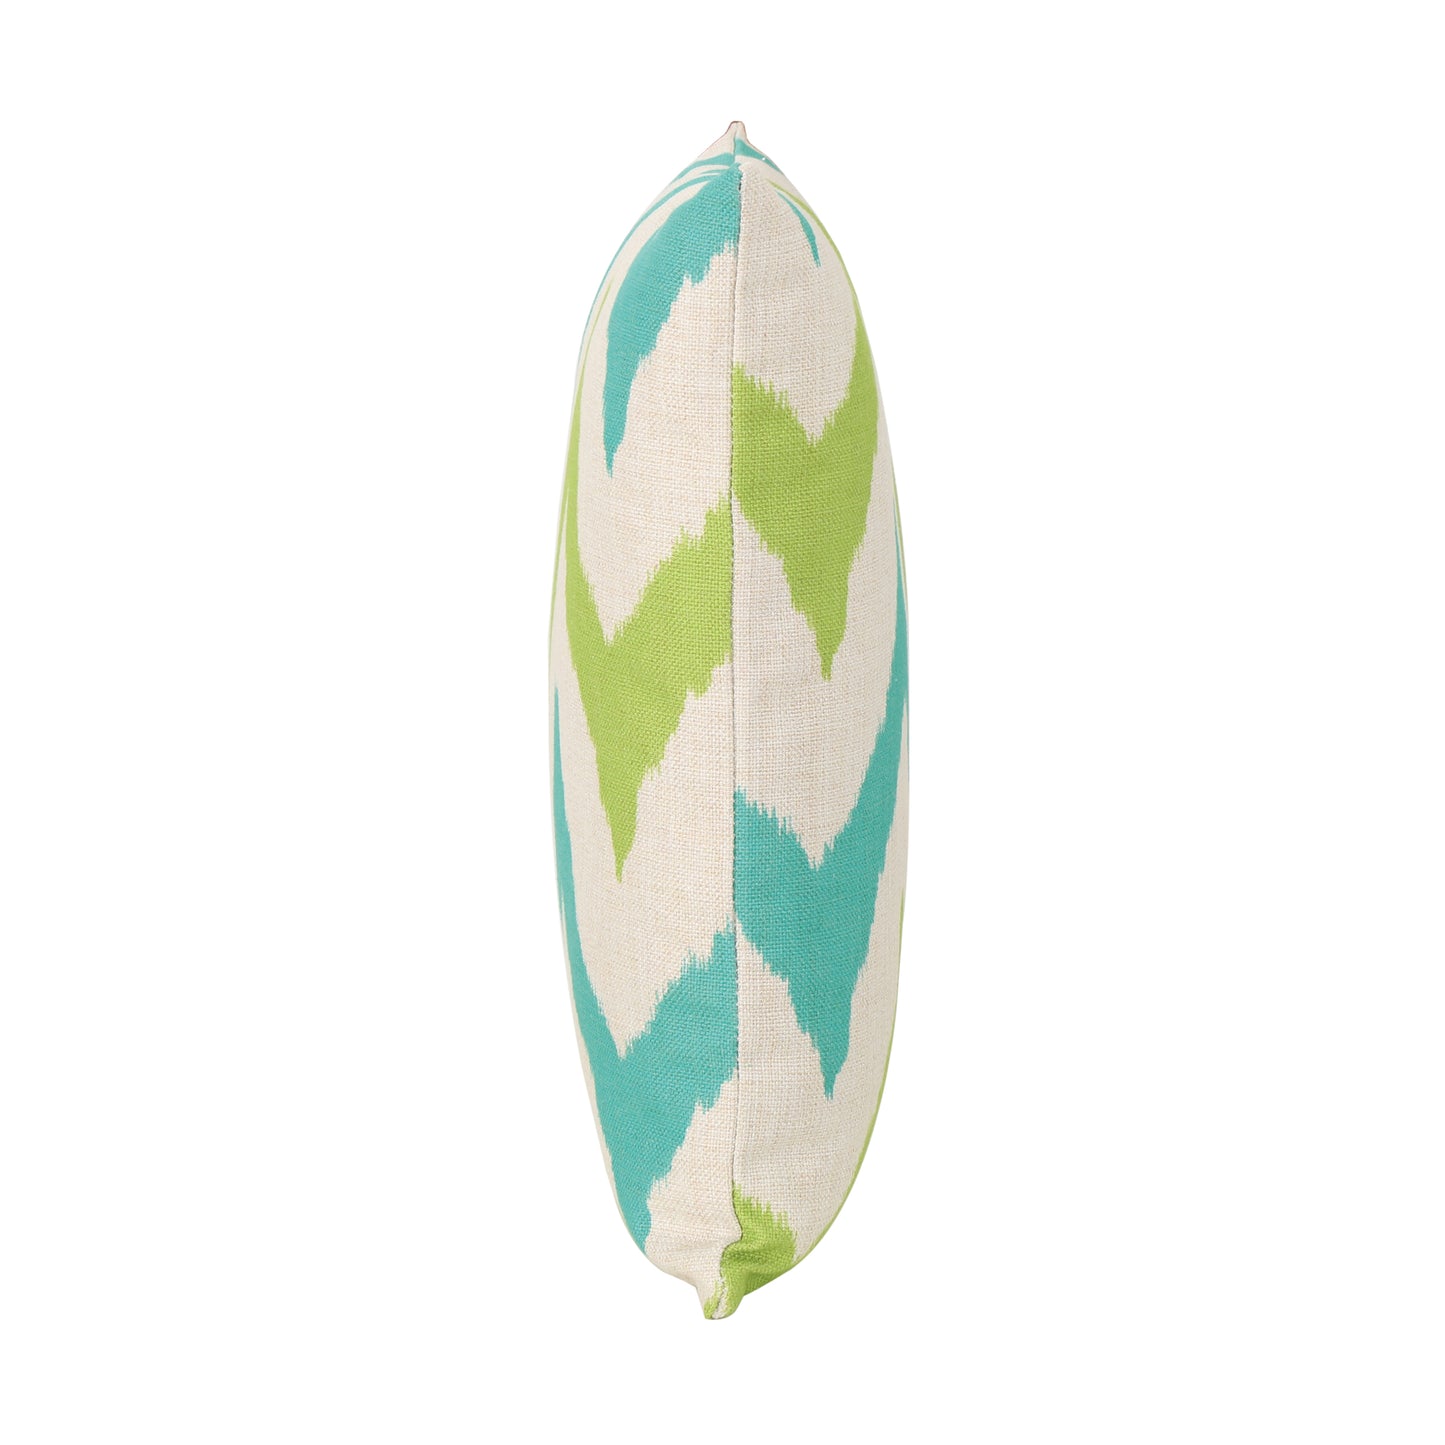 Liz Outdoor Water Resistant 18-inch Square Pillow, Teal / Green Chevron